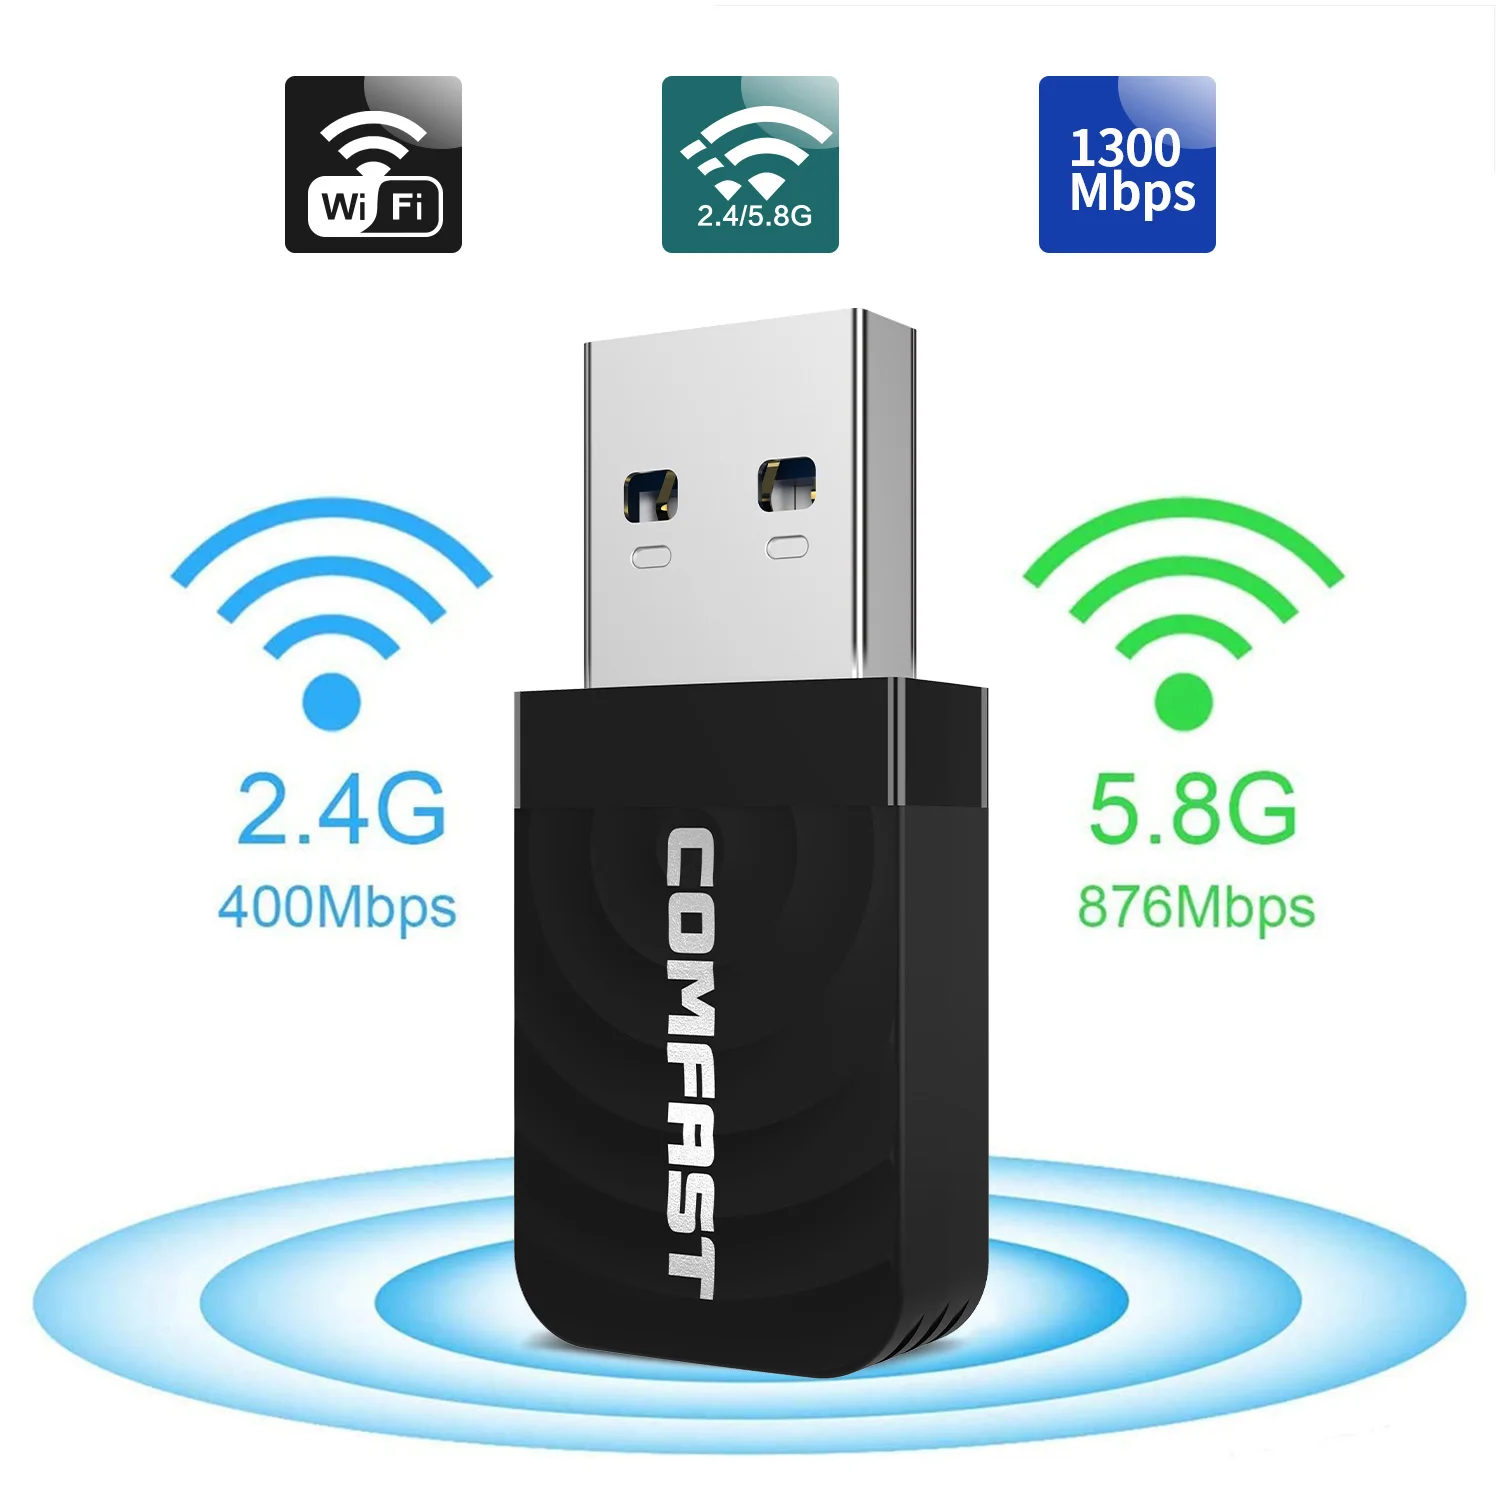 5Ghz 1300Mbps Usb Wireless Network wifi Card Usb3.0 Lan Ethernet Wi-Fi Dongle Antenna dual band Wifi Adapter for laptop desktops